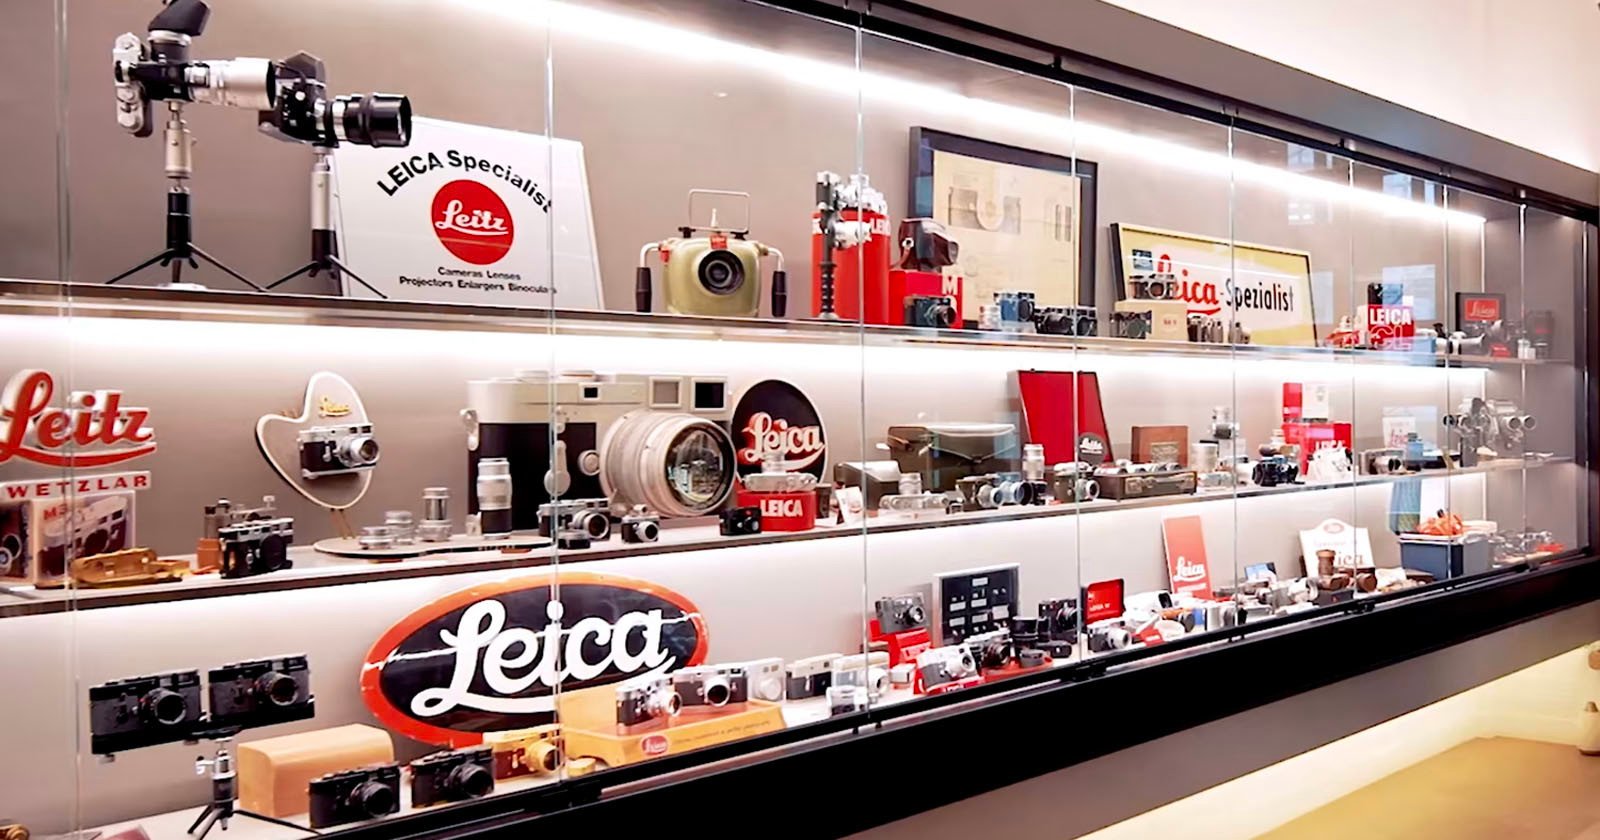  collector has many leica cameras opened his 